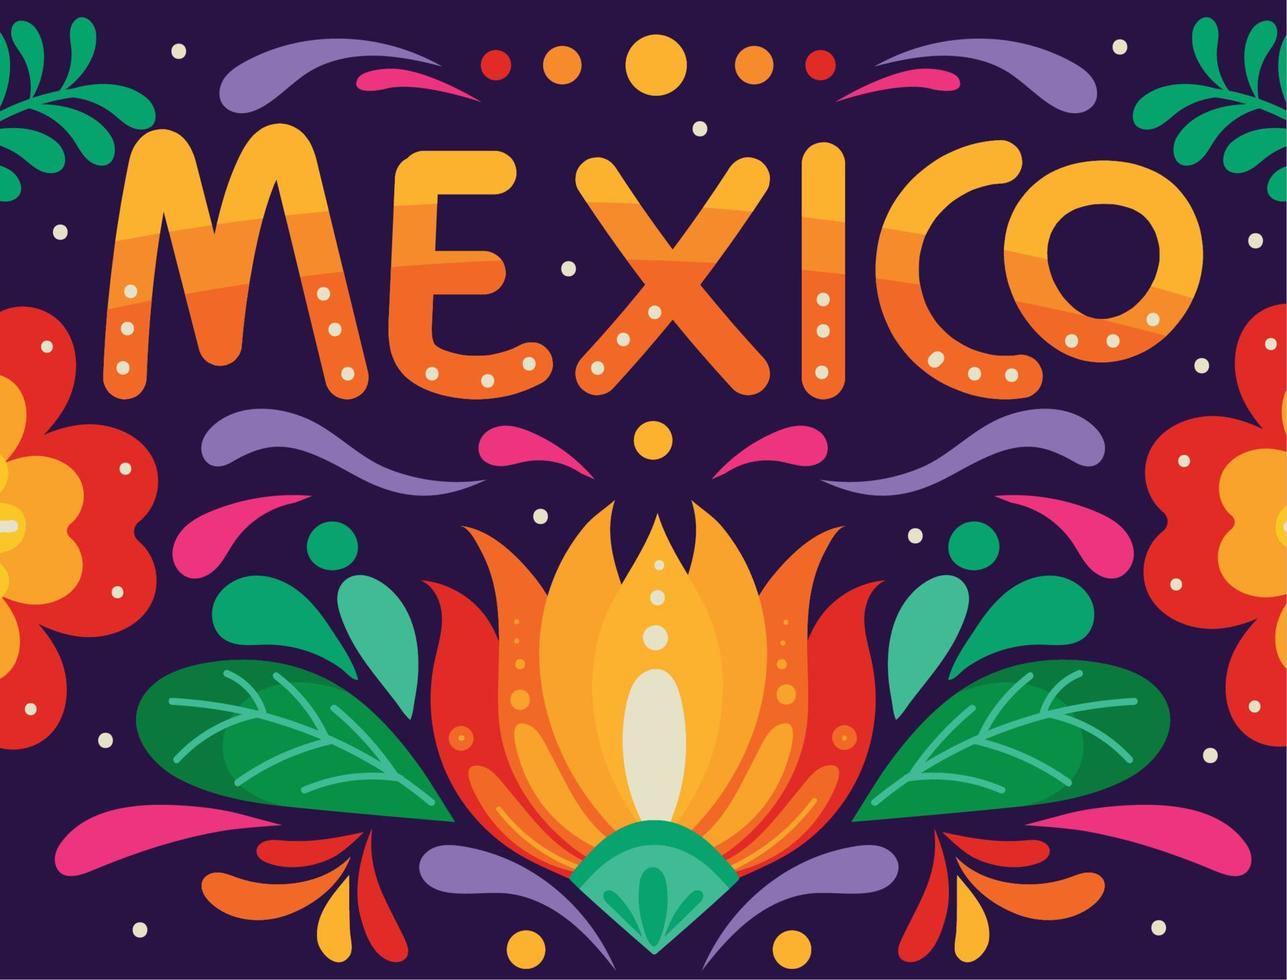 mexico lettering and flowers vector